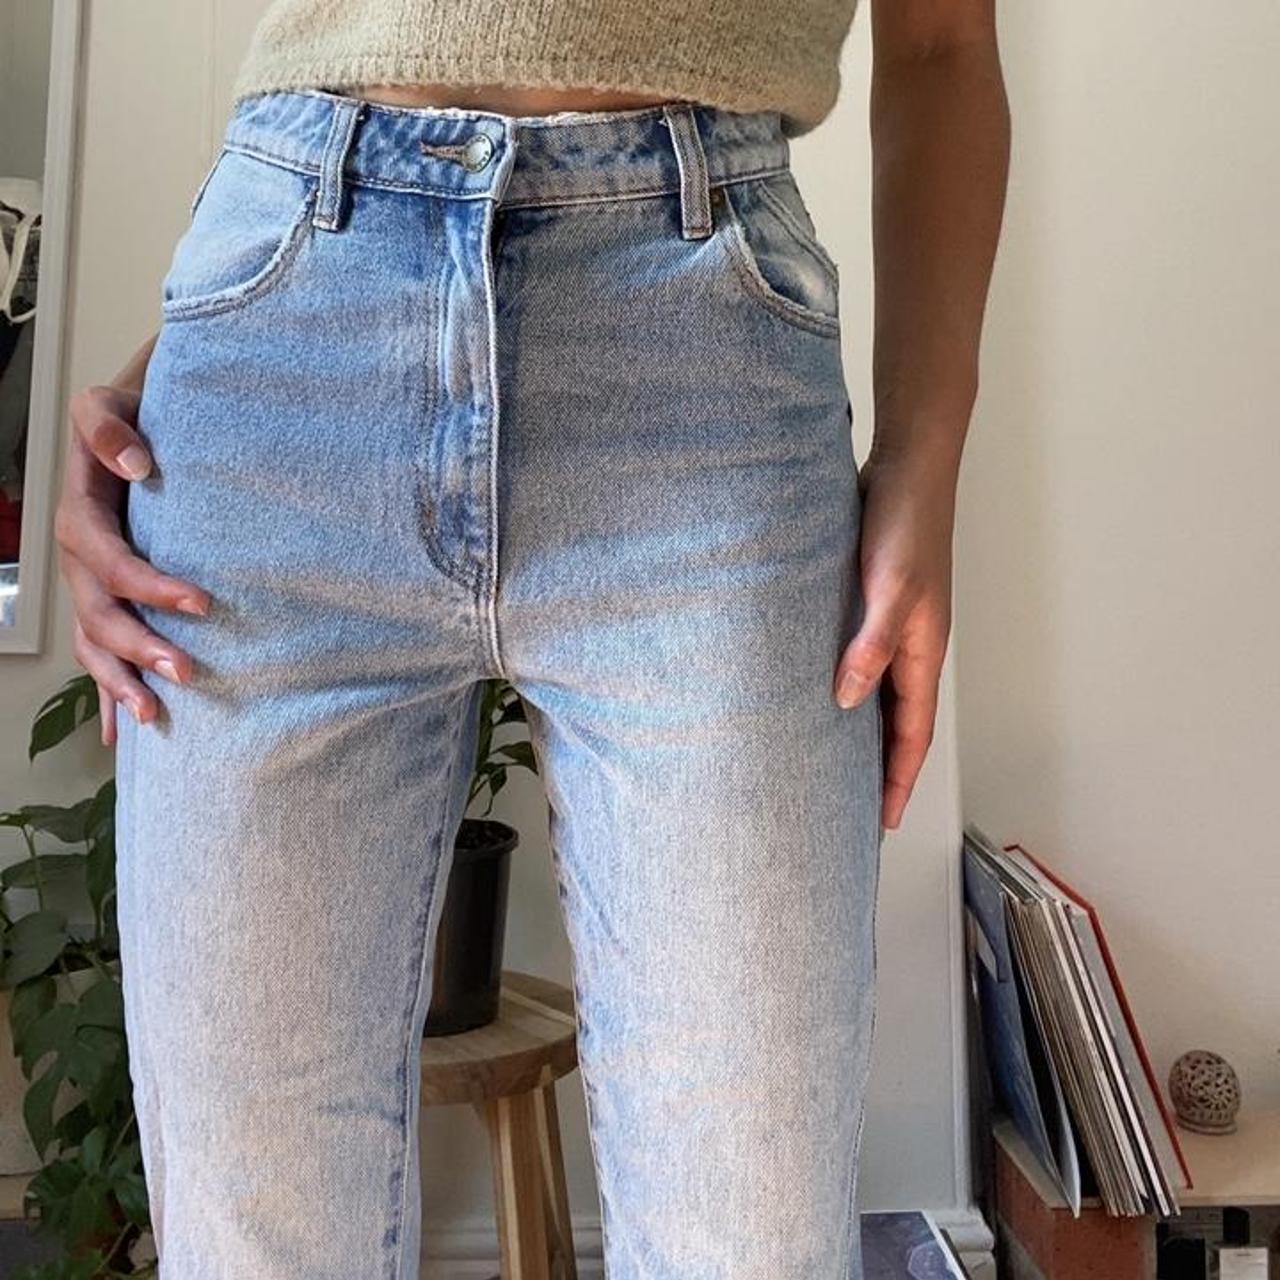 Rollas high waisted jeans, super comfy fit on an... - Depop